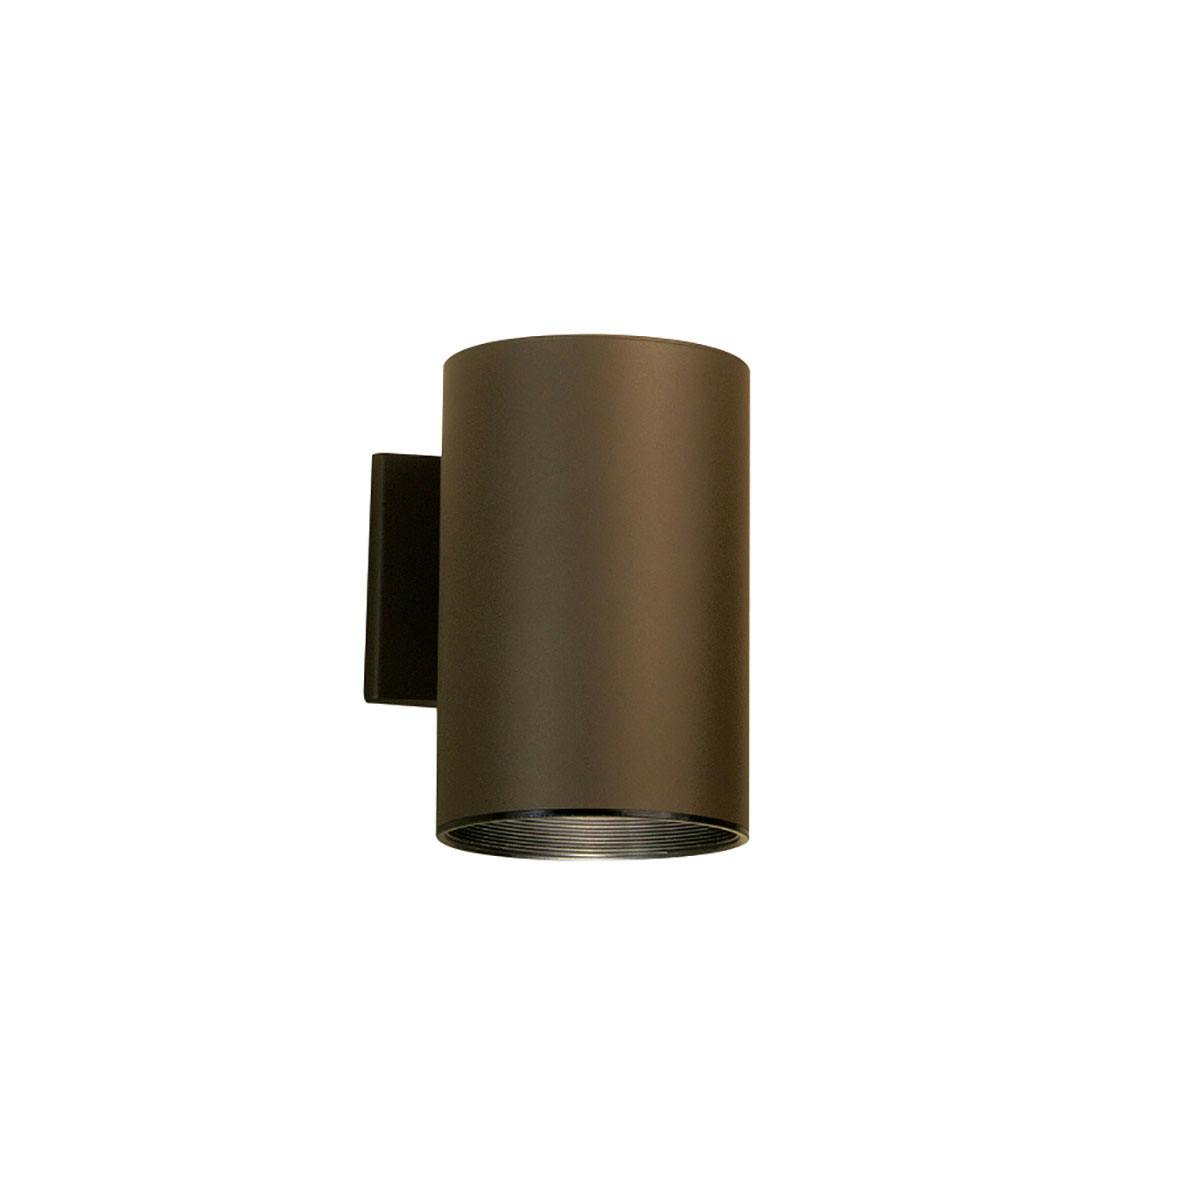 Cylinder 7.75" 1 Light Wall Light Bronze on a white background